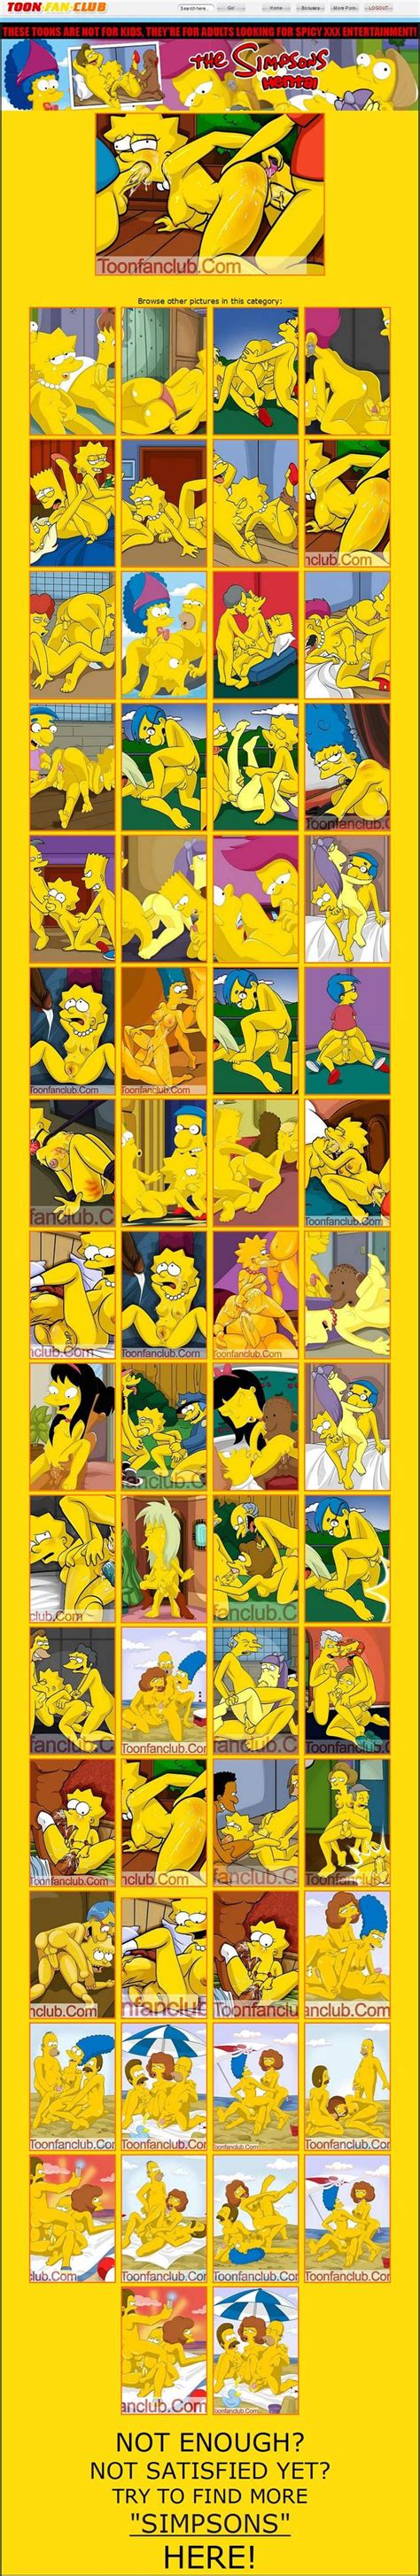 Crazy Porn From Simpsons Image 19674